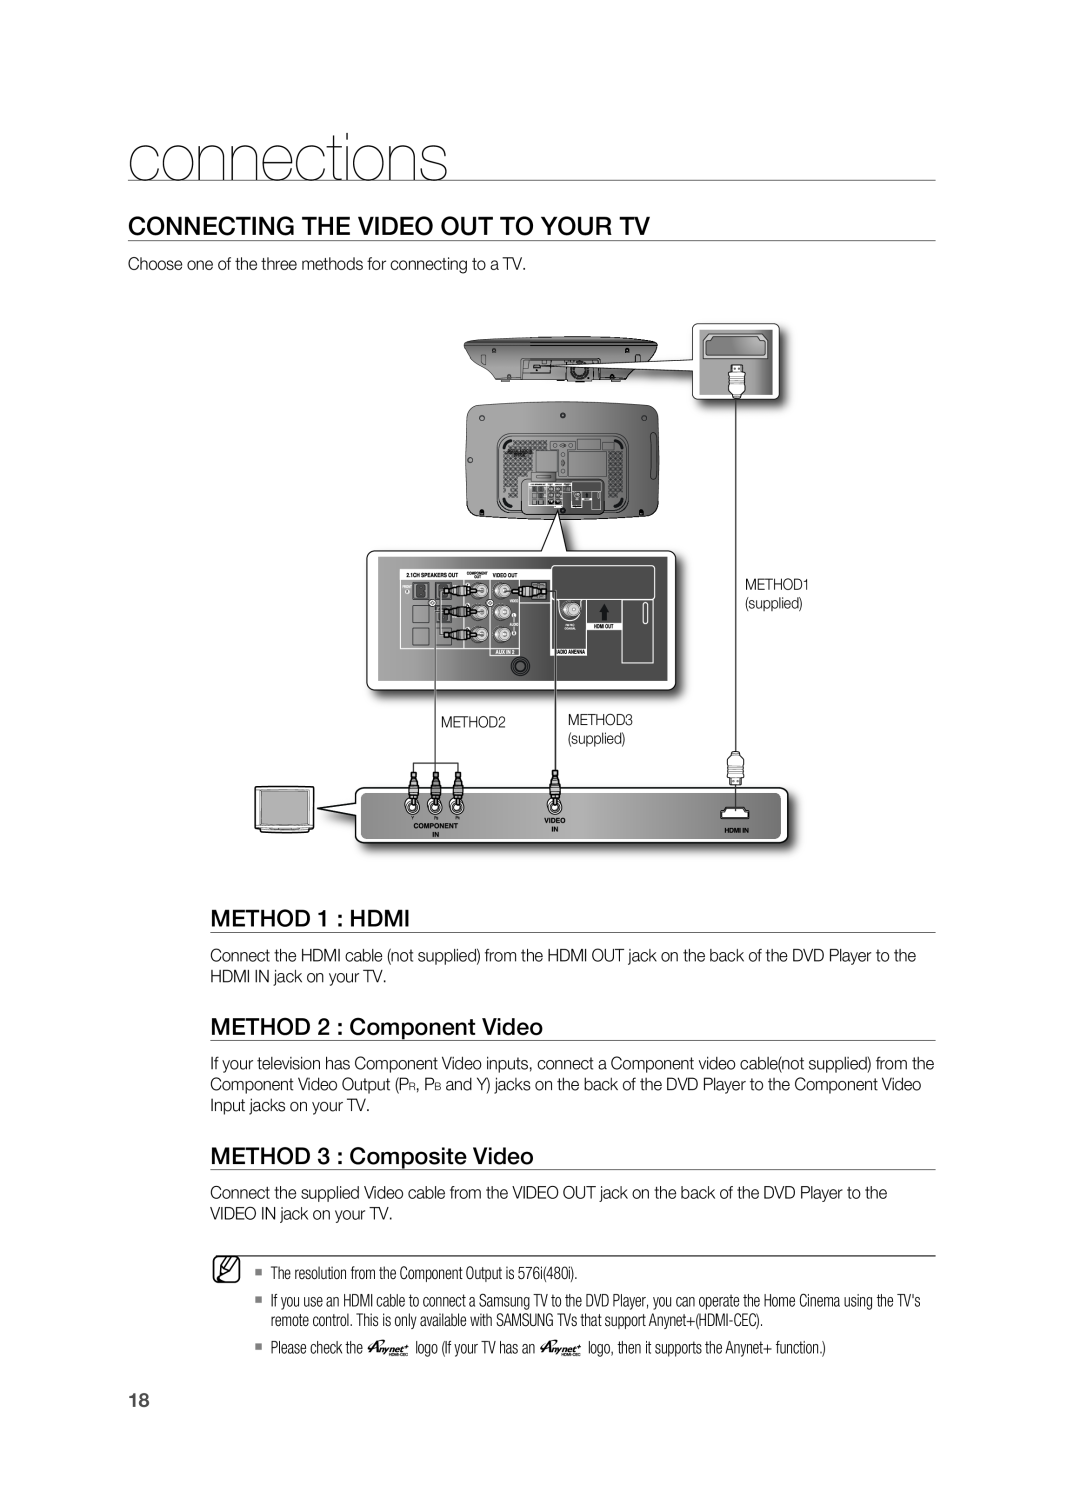 Samsung HT-X710 CONNECTING THE VIDEO OUT TO YOUr TV, METHOD 1 HDMI, METHOD 2 Component Video, METHOD 3 Composite Video 